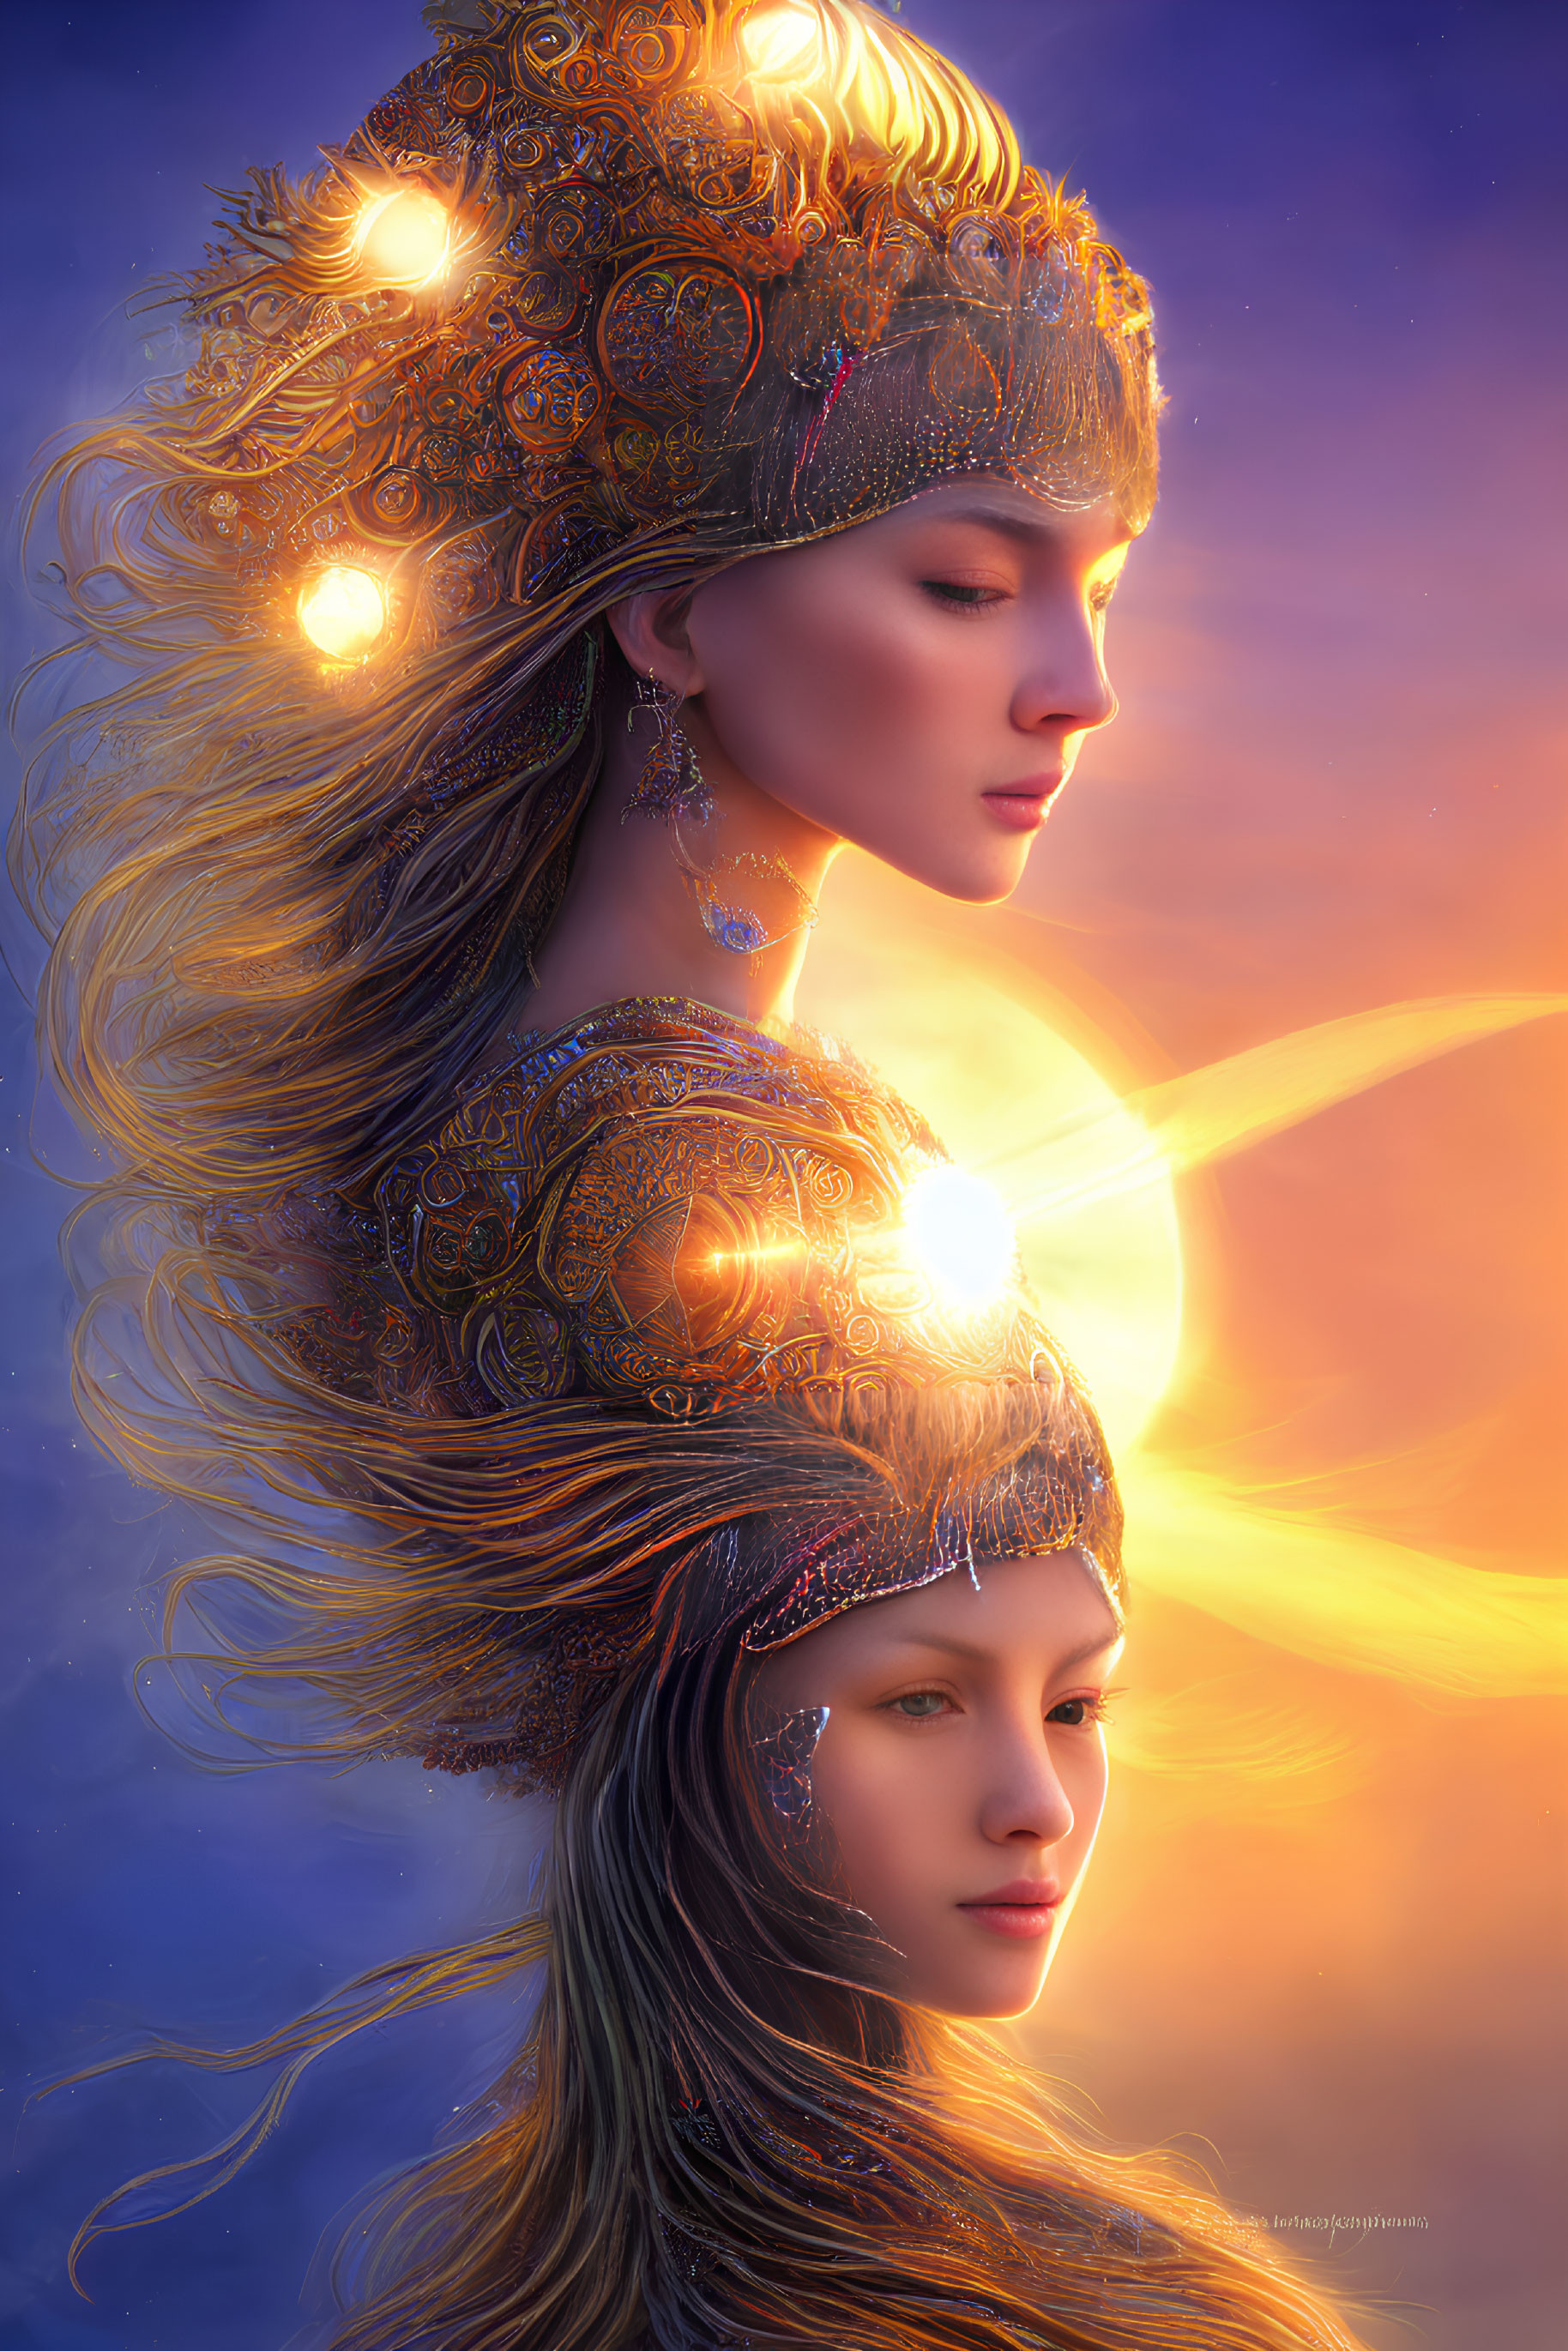 Ethereal women digital art portrait with ornate headpieces and sunset backdrop